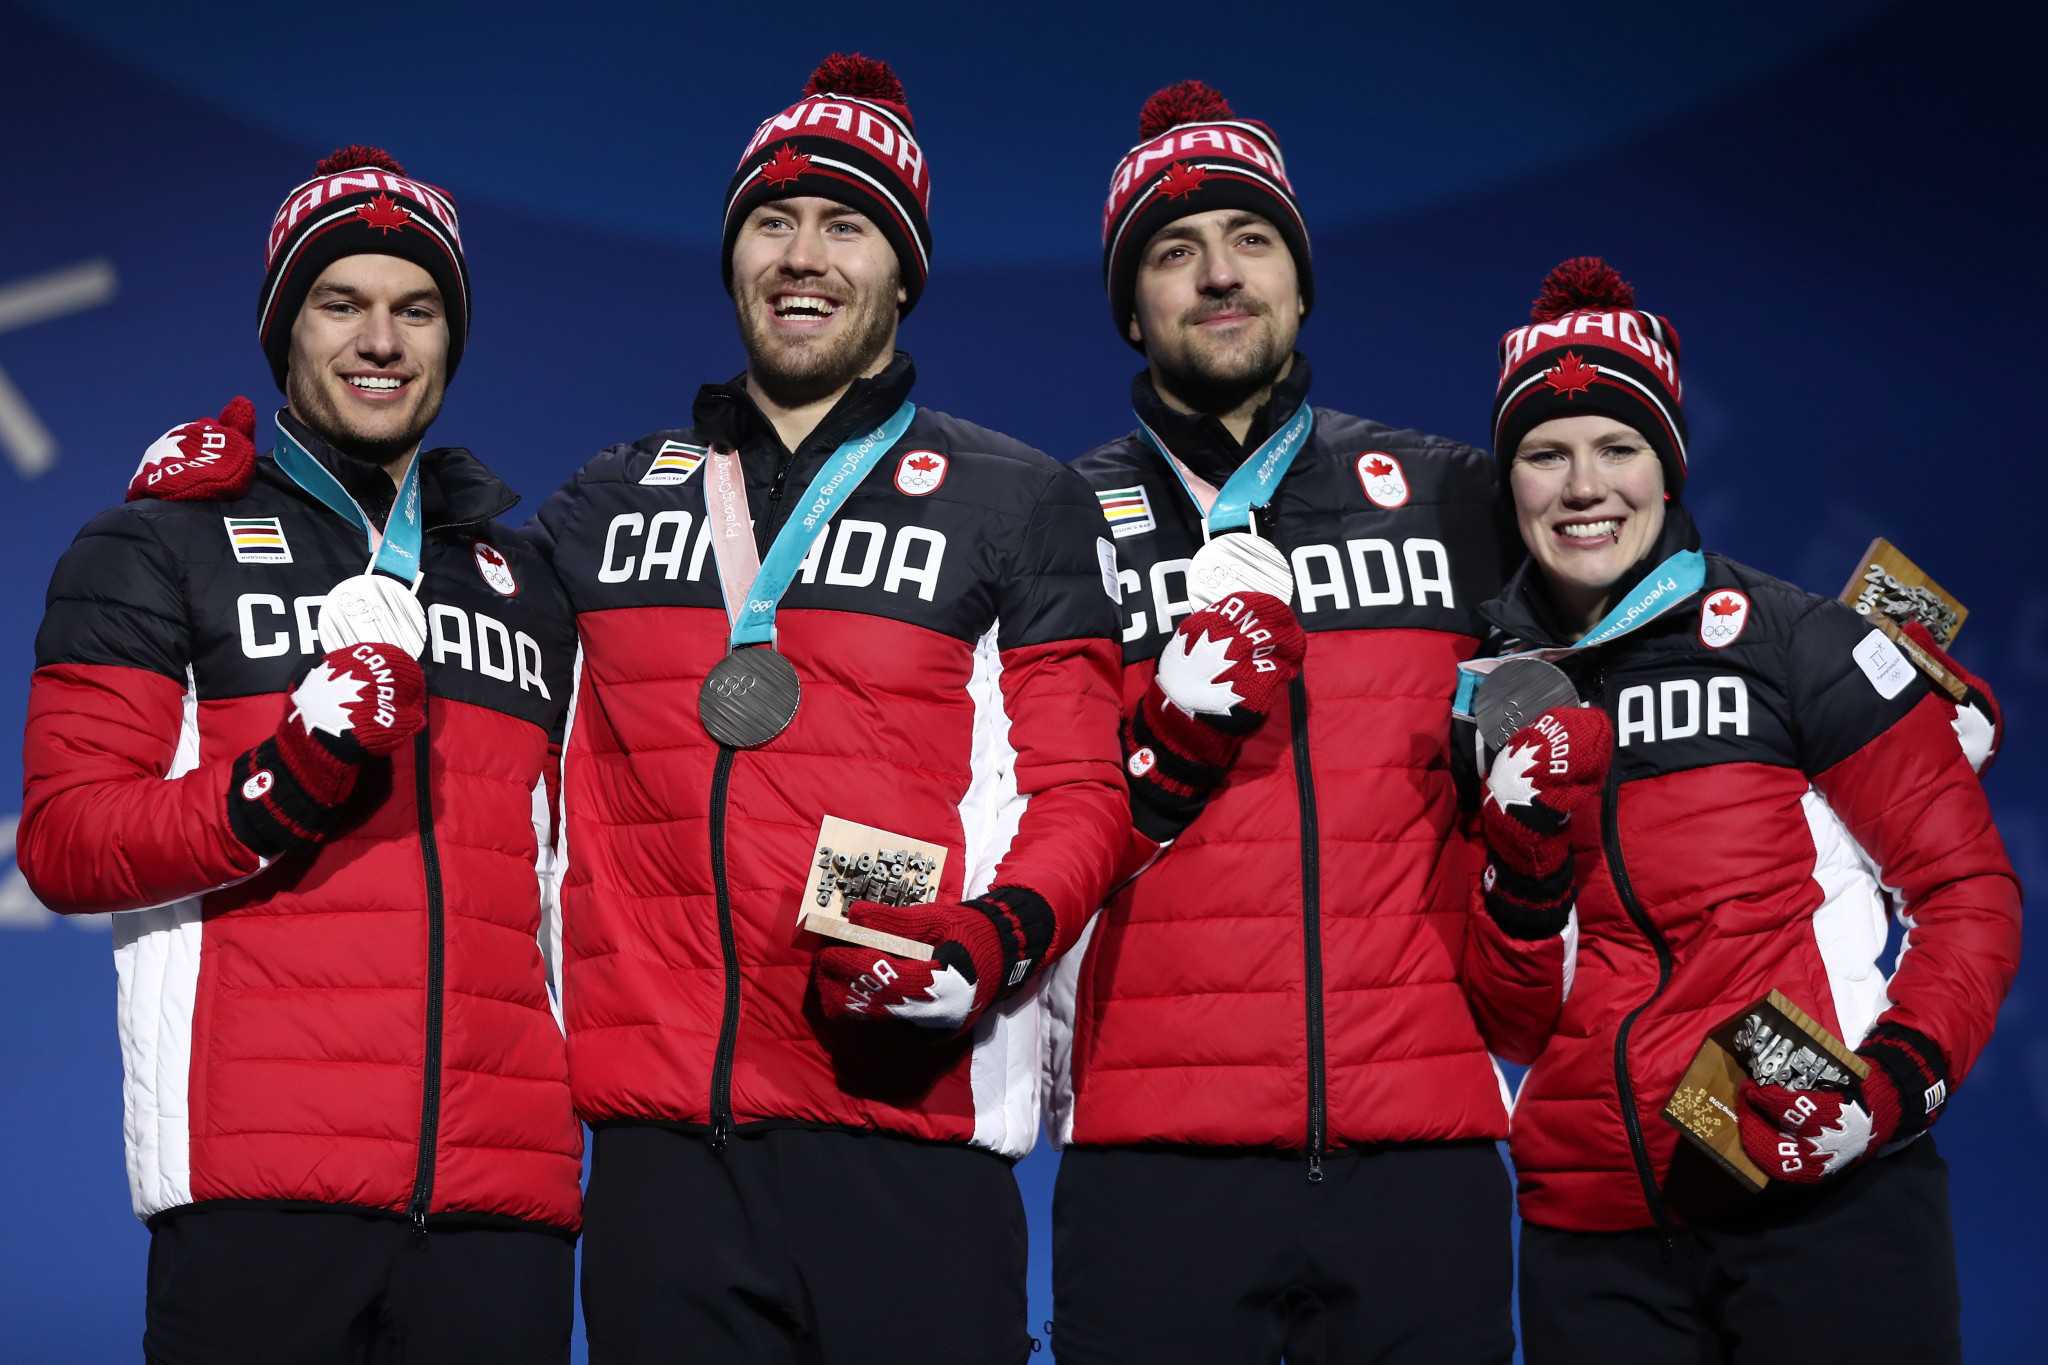 Canada's luge team achieved a silver and bronze medal under Wolfgang Staudinger's stewardship at Pyeongchang 2018 ©Getty Images